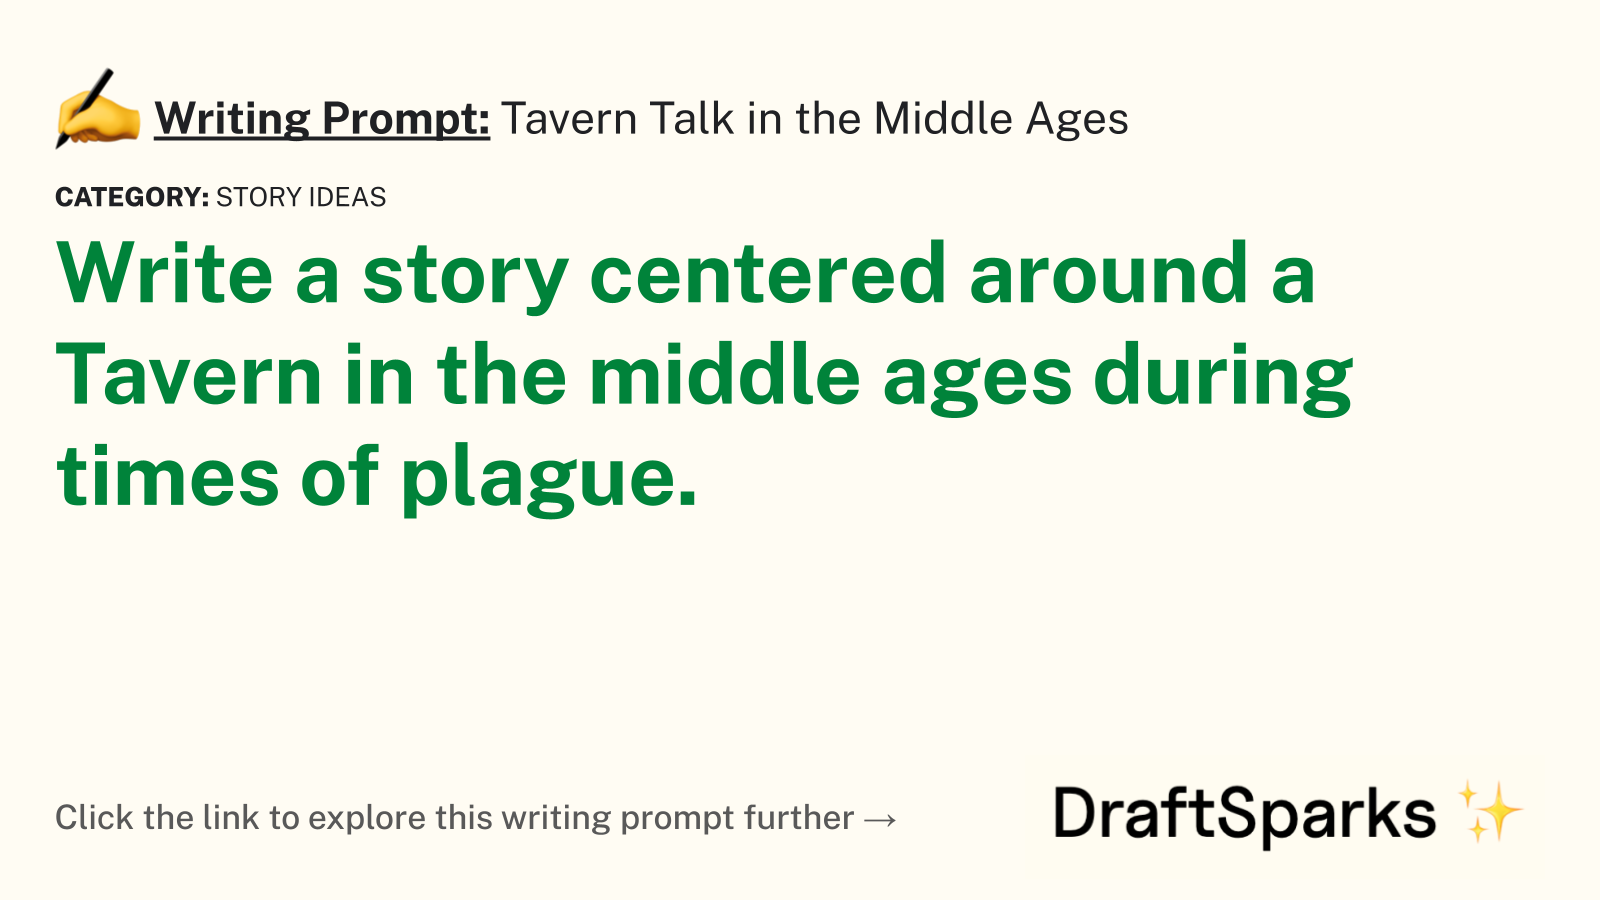 Tavern Talk in the Middle Ages